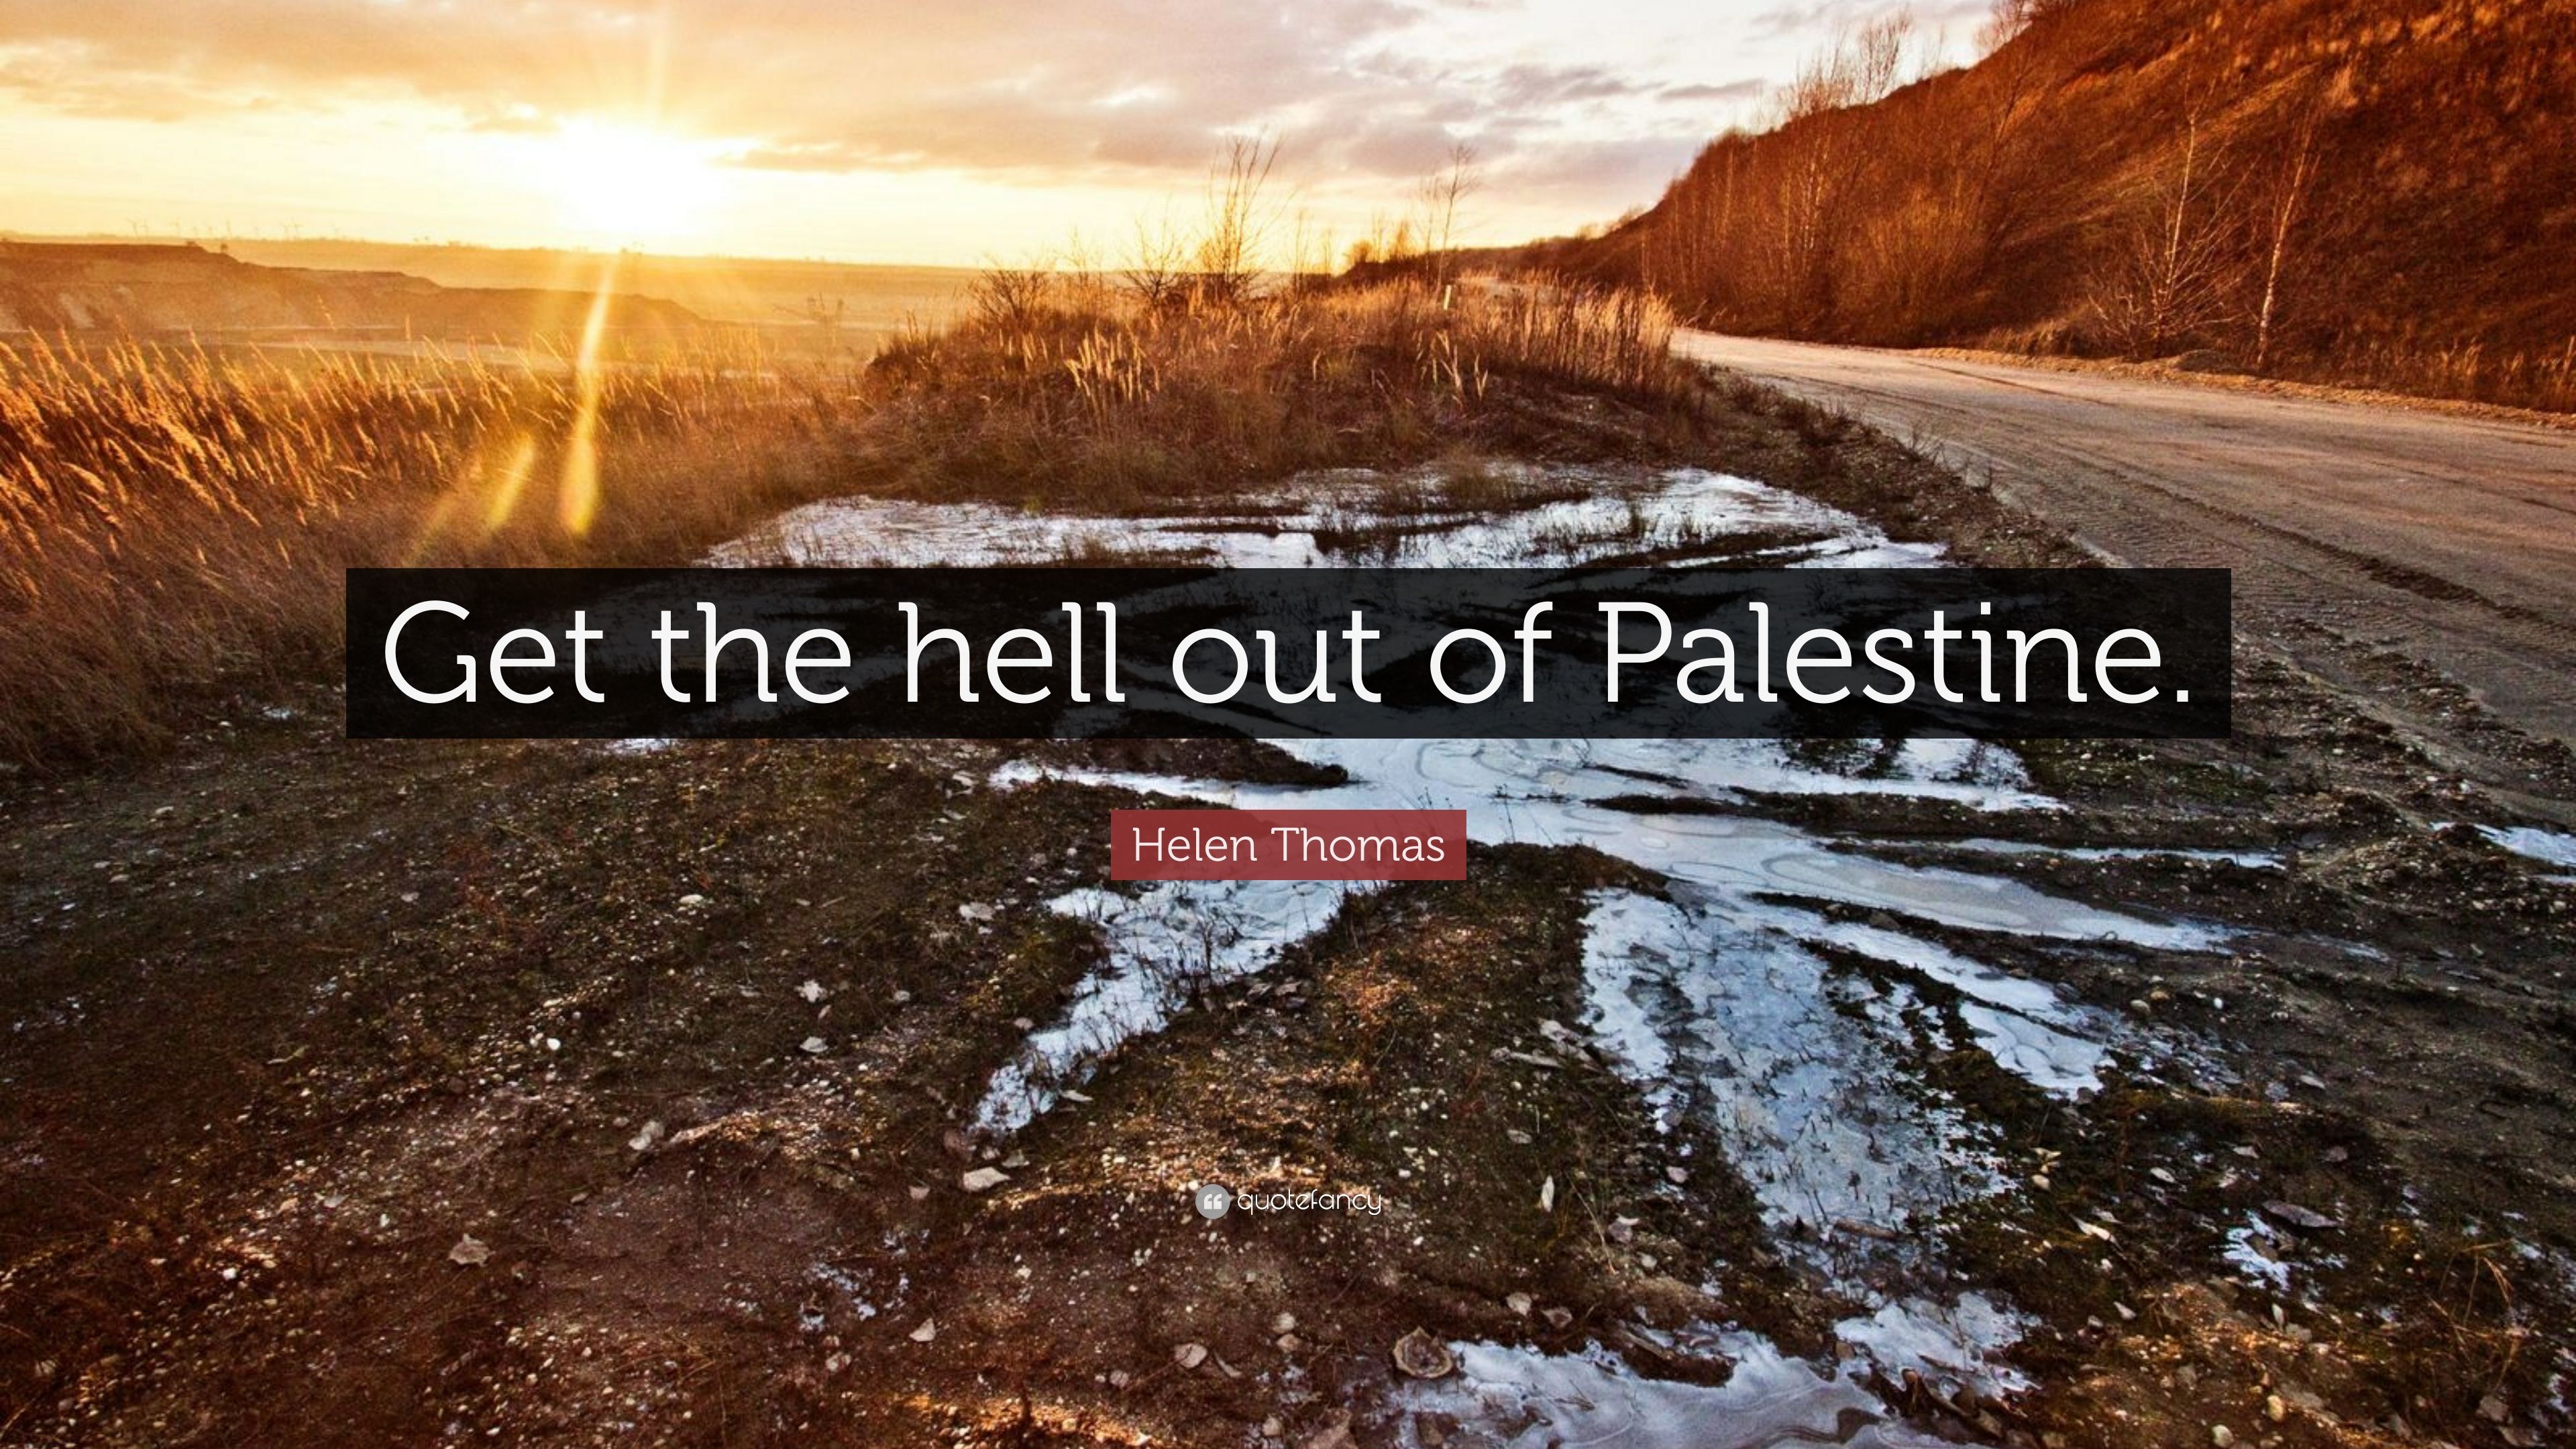 Helen Thomas Quote: “Get the hell out of Palestine.” 7 wallpaper